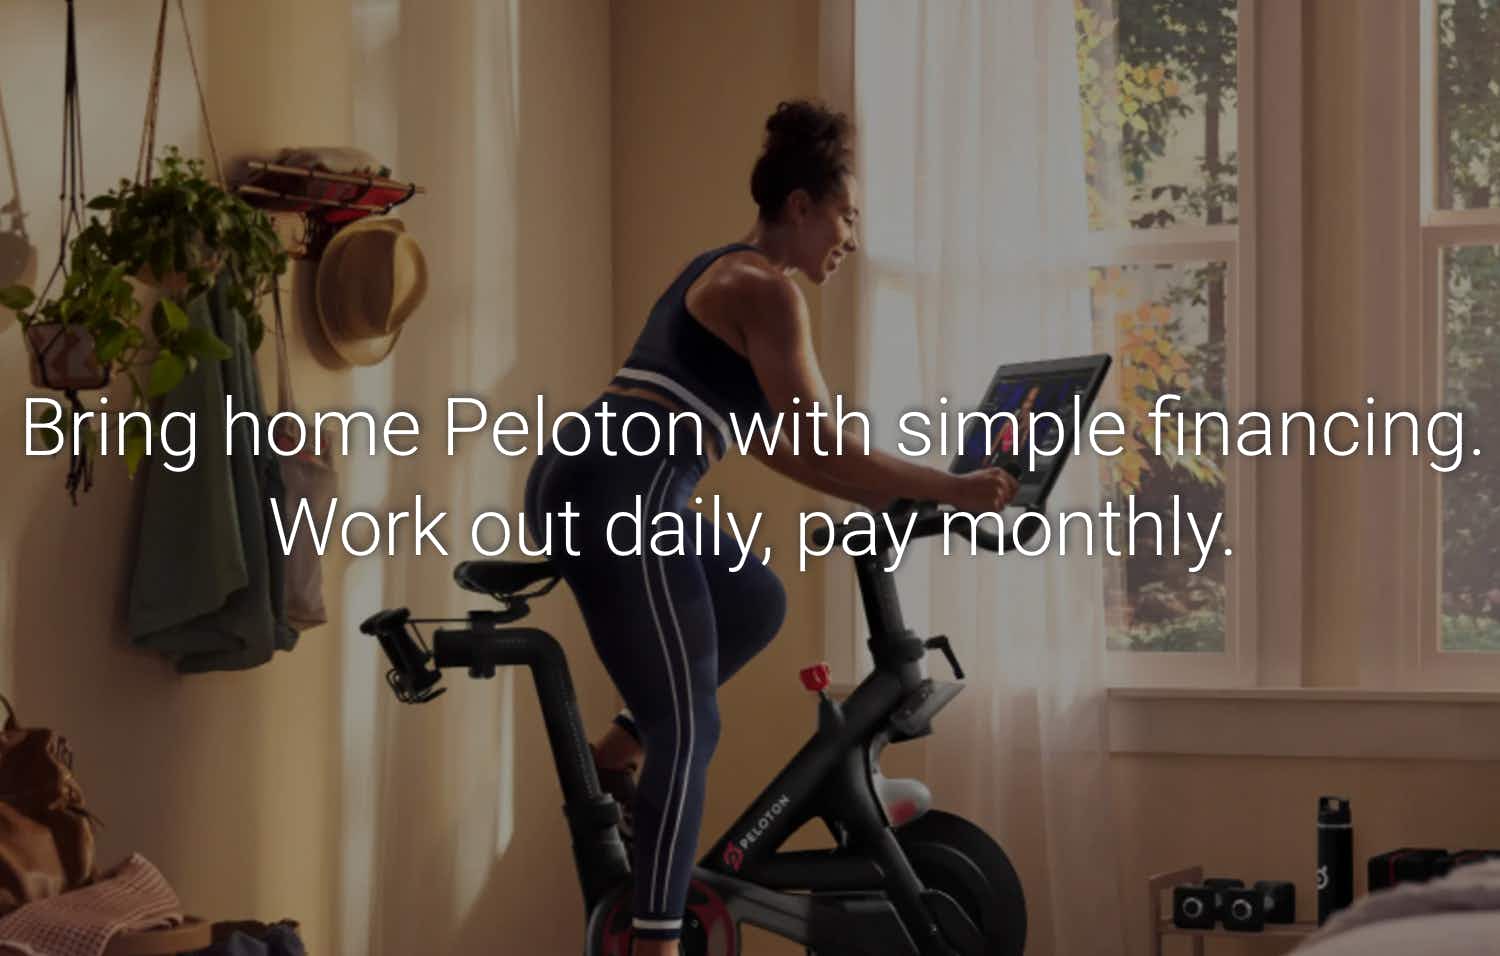 A graphic from Peloton with a woman on a Peloton bike that reads, "Bring home Peloton with simple financing. Work out daily, pay monthly.